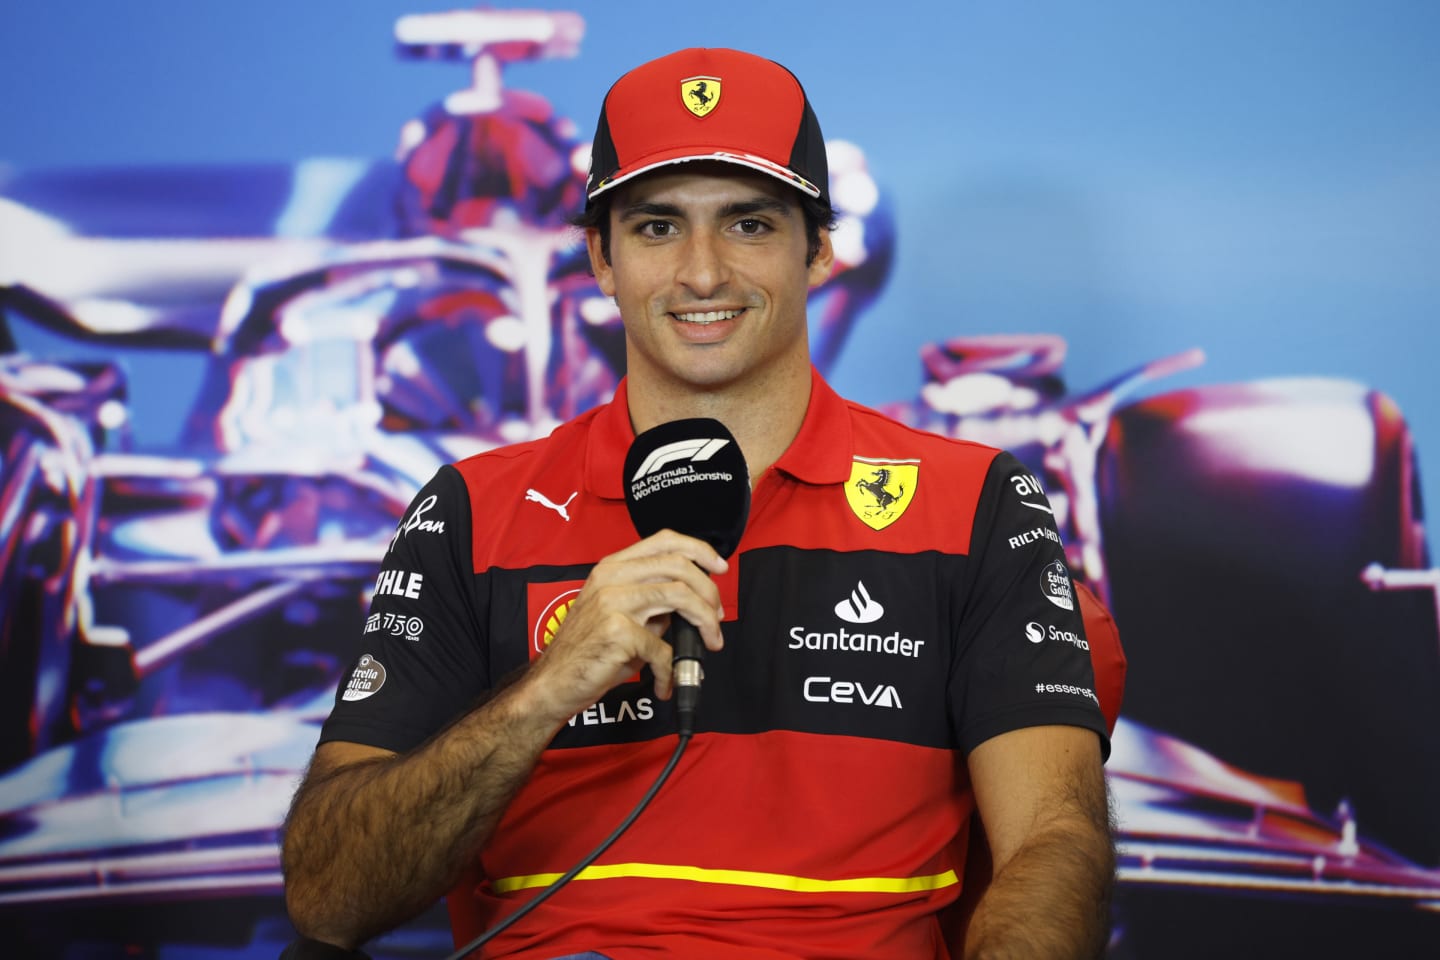 AUSTIN, TEXAS - OCTOBER 20: Carlos Sainz of Spain and Ferrari talks in the Drivers Press Conference during previews ahead of the F1 Grand Prix of USA at Circuit of The Americas on October 20, 2022 in Austin, Texas. (Photo by Jared C. Tilton/Getty Images)